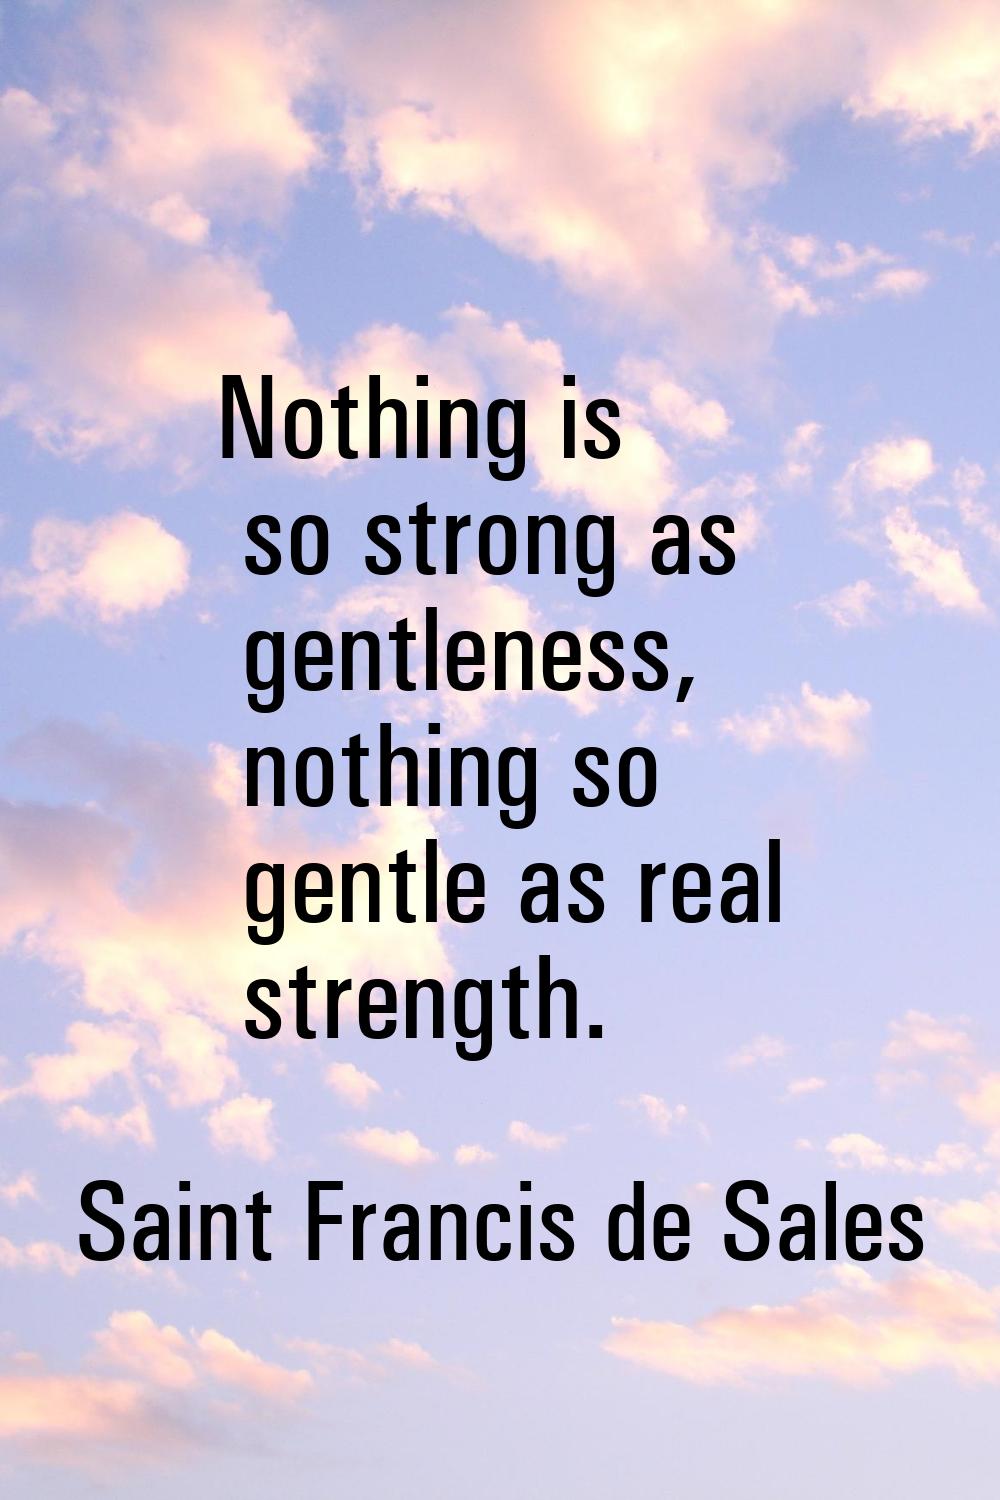 Nothing is so strong as gentleness, nothing so gentle as real strength.